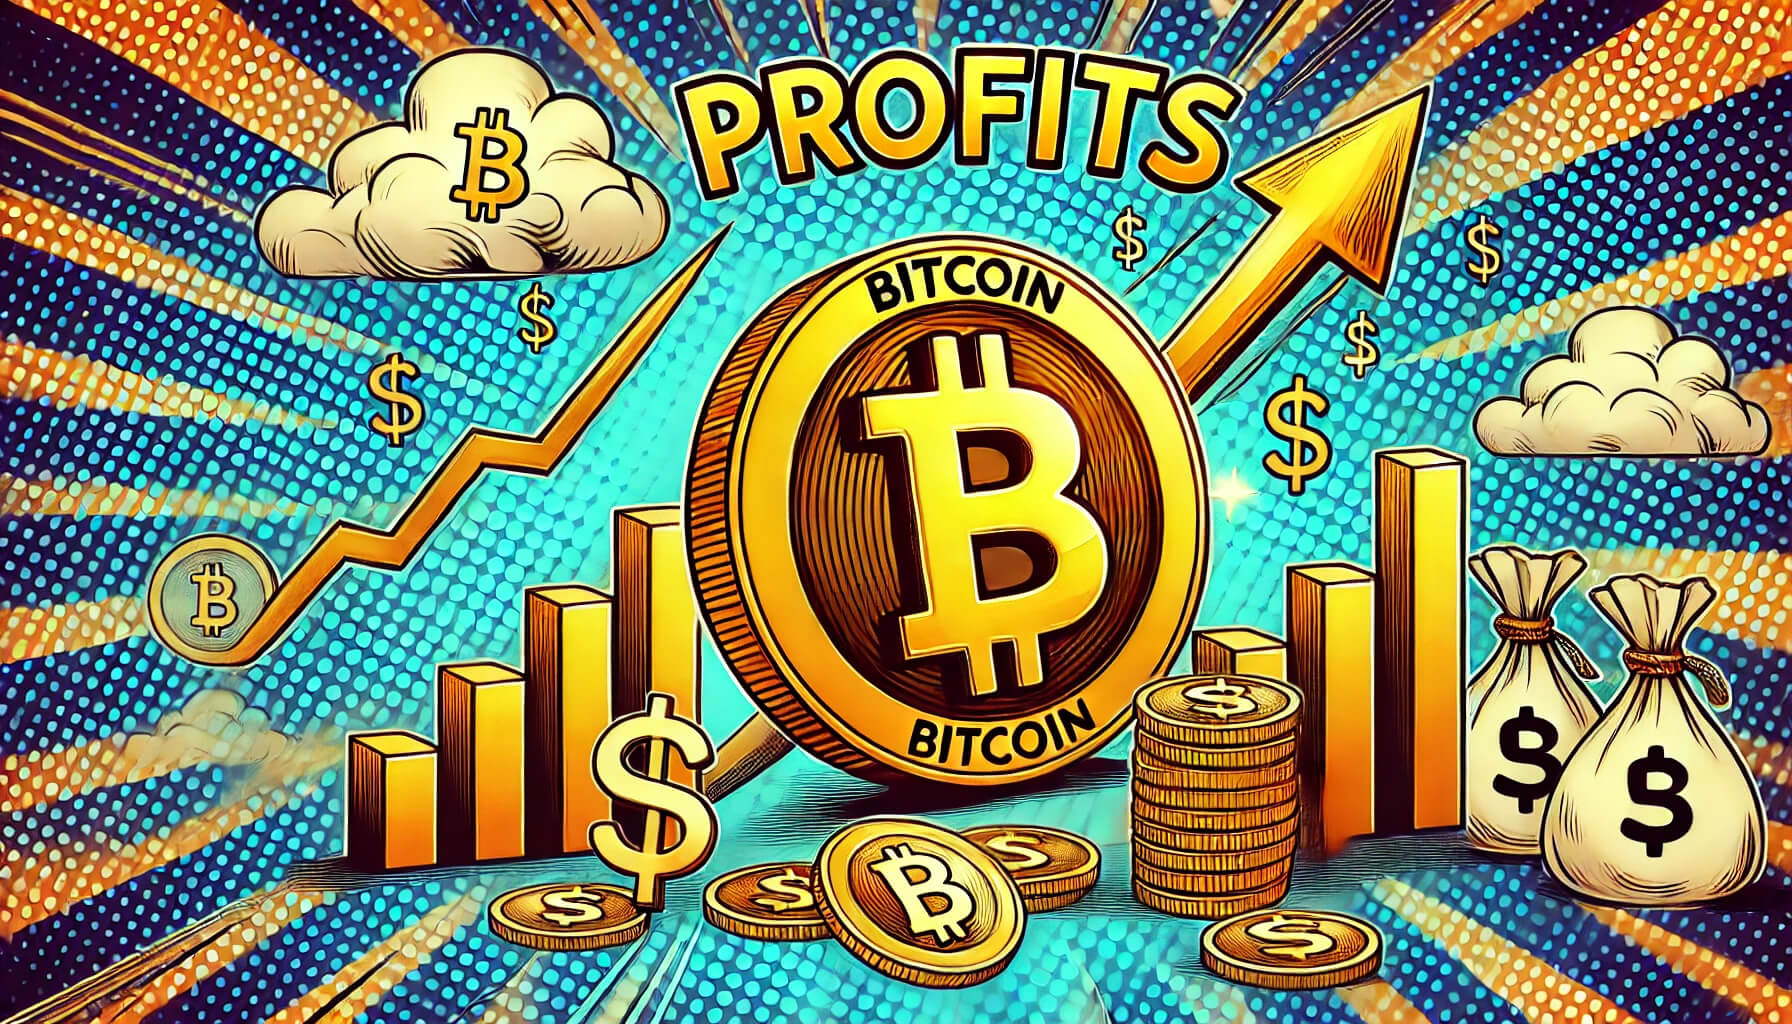 Record Profitability for Bitcoin Supply as Market Remains Stable